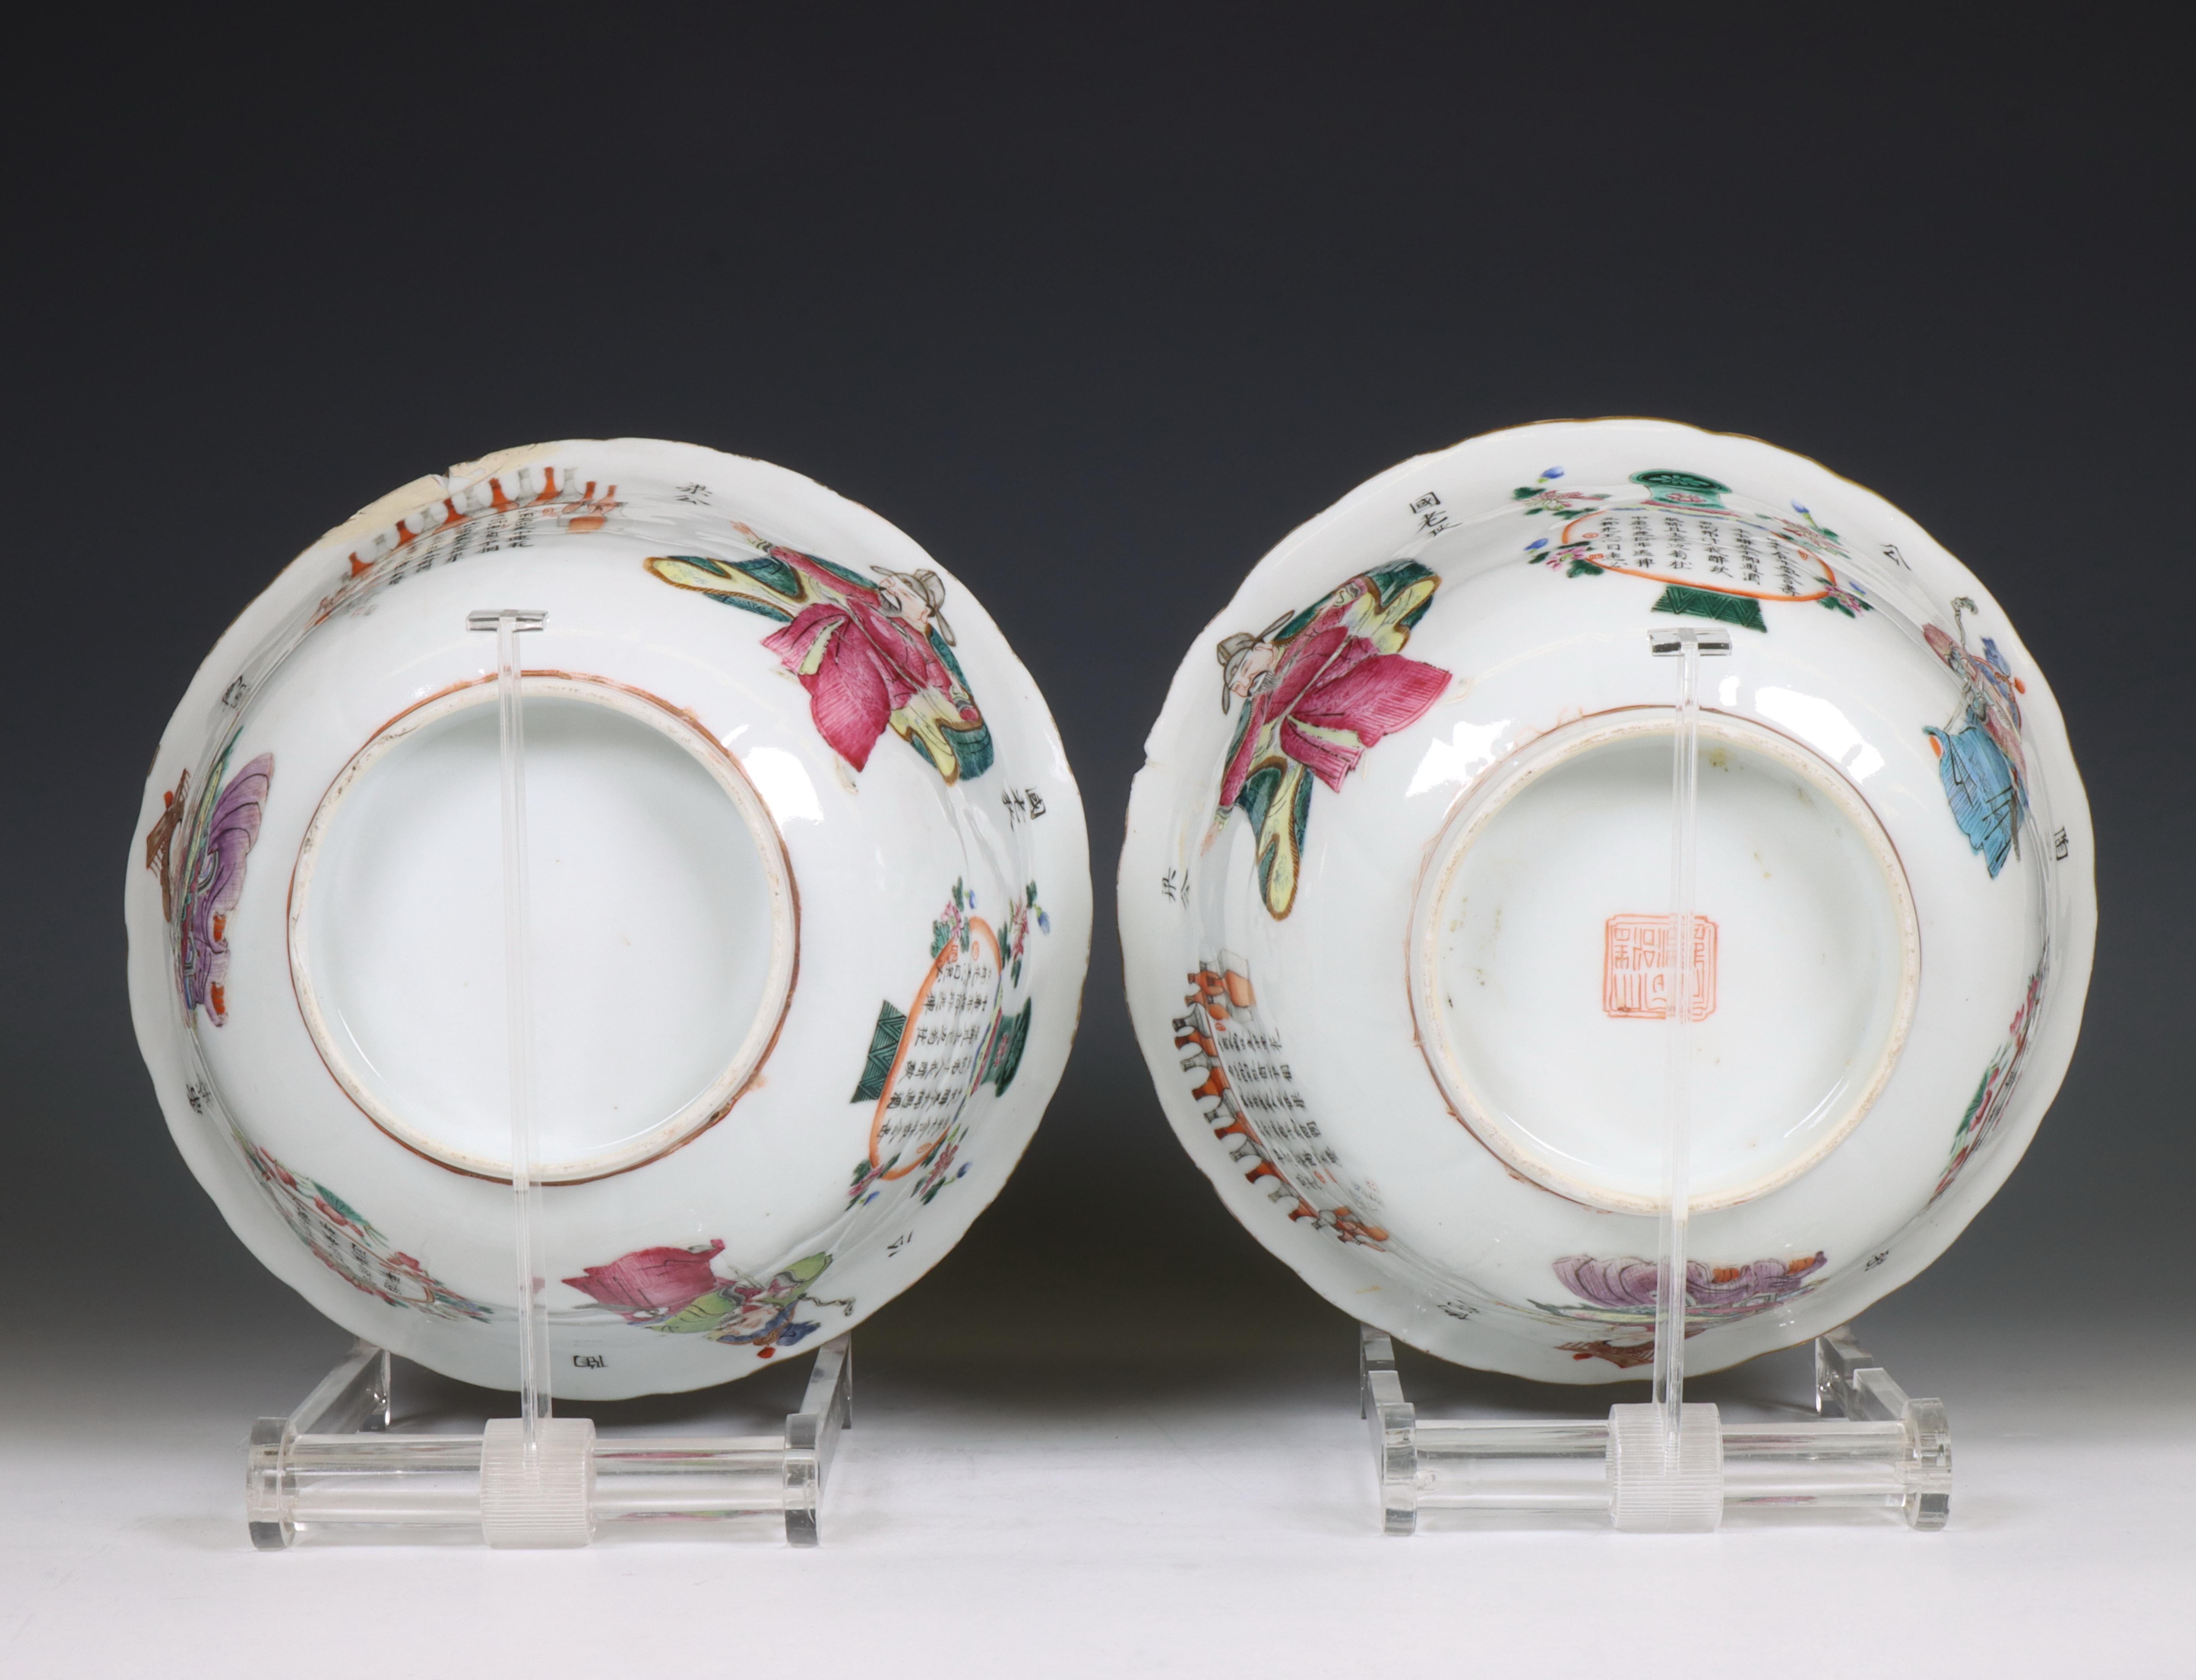 China, two famille rose porcelain 'Wu Shuang Pu' bowls, late Qing dynasty (1644-1912), - Image 2 of 9